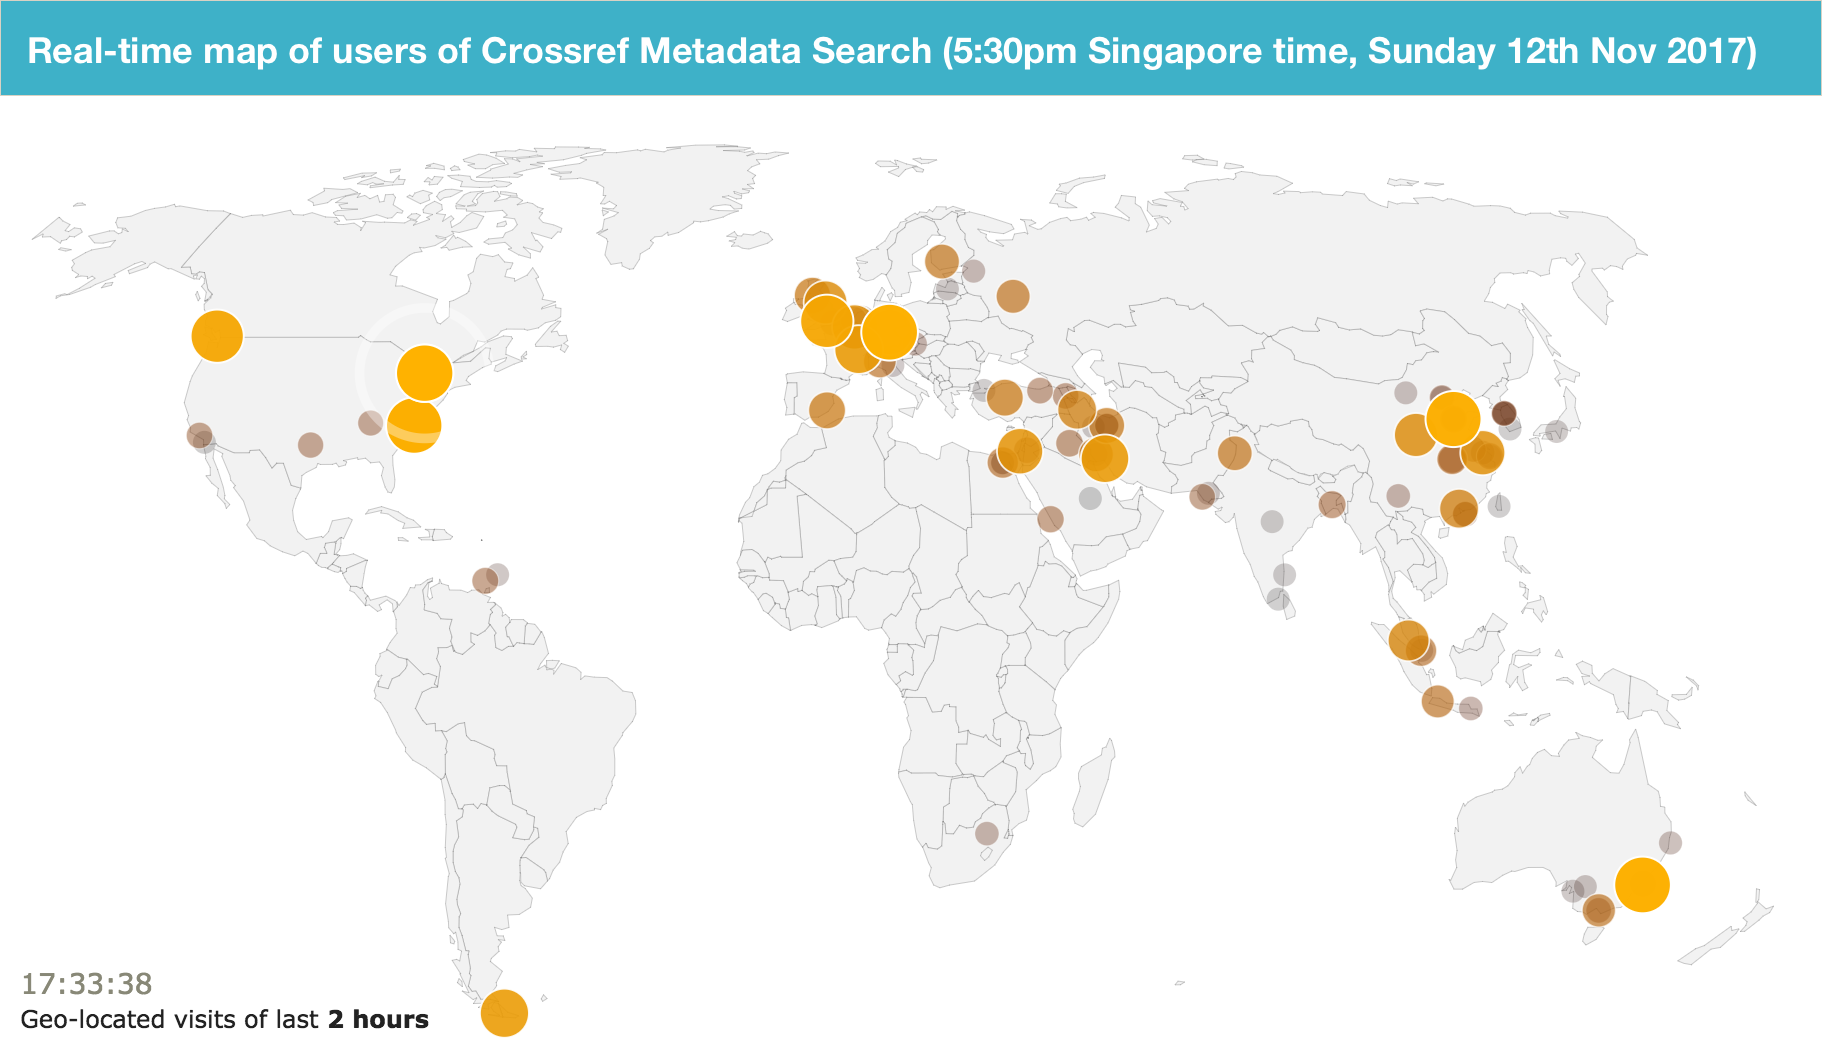 World map of current metadata search users